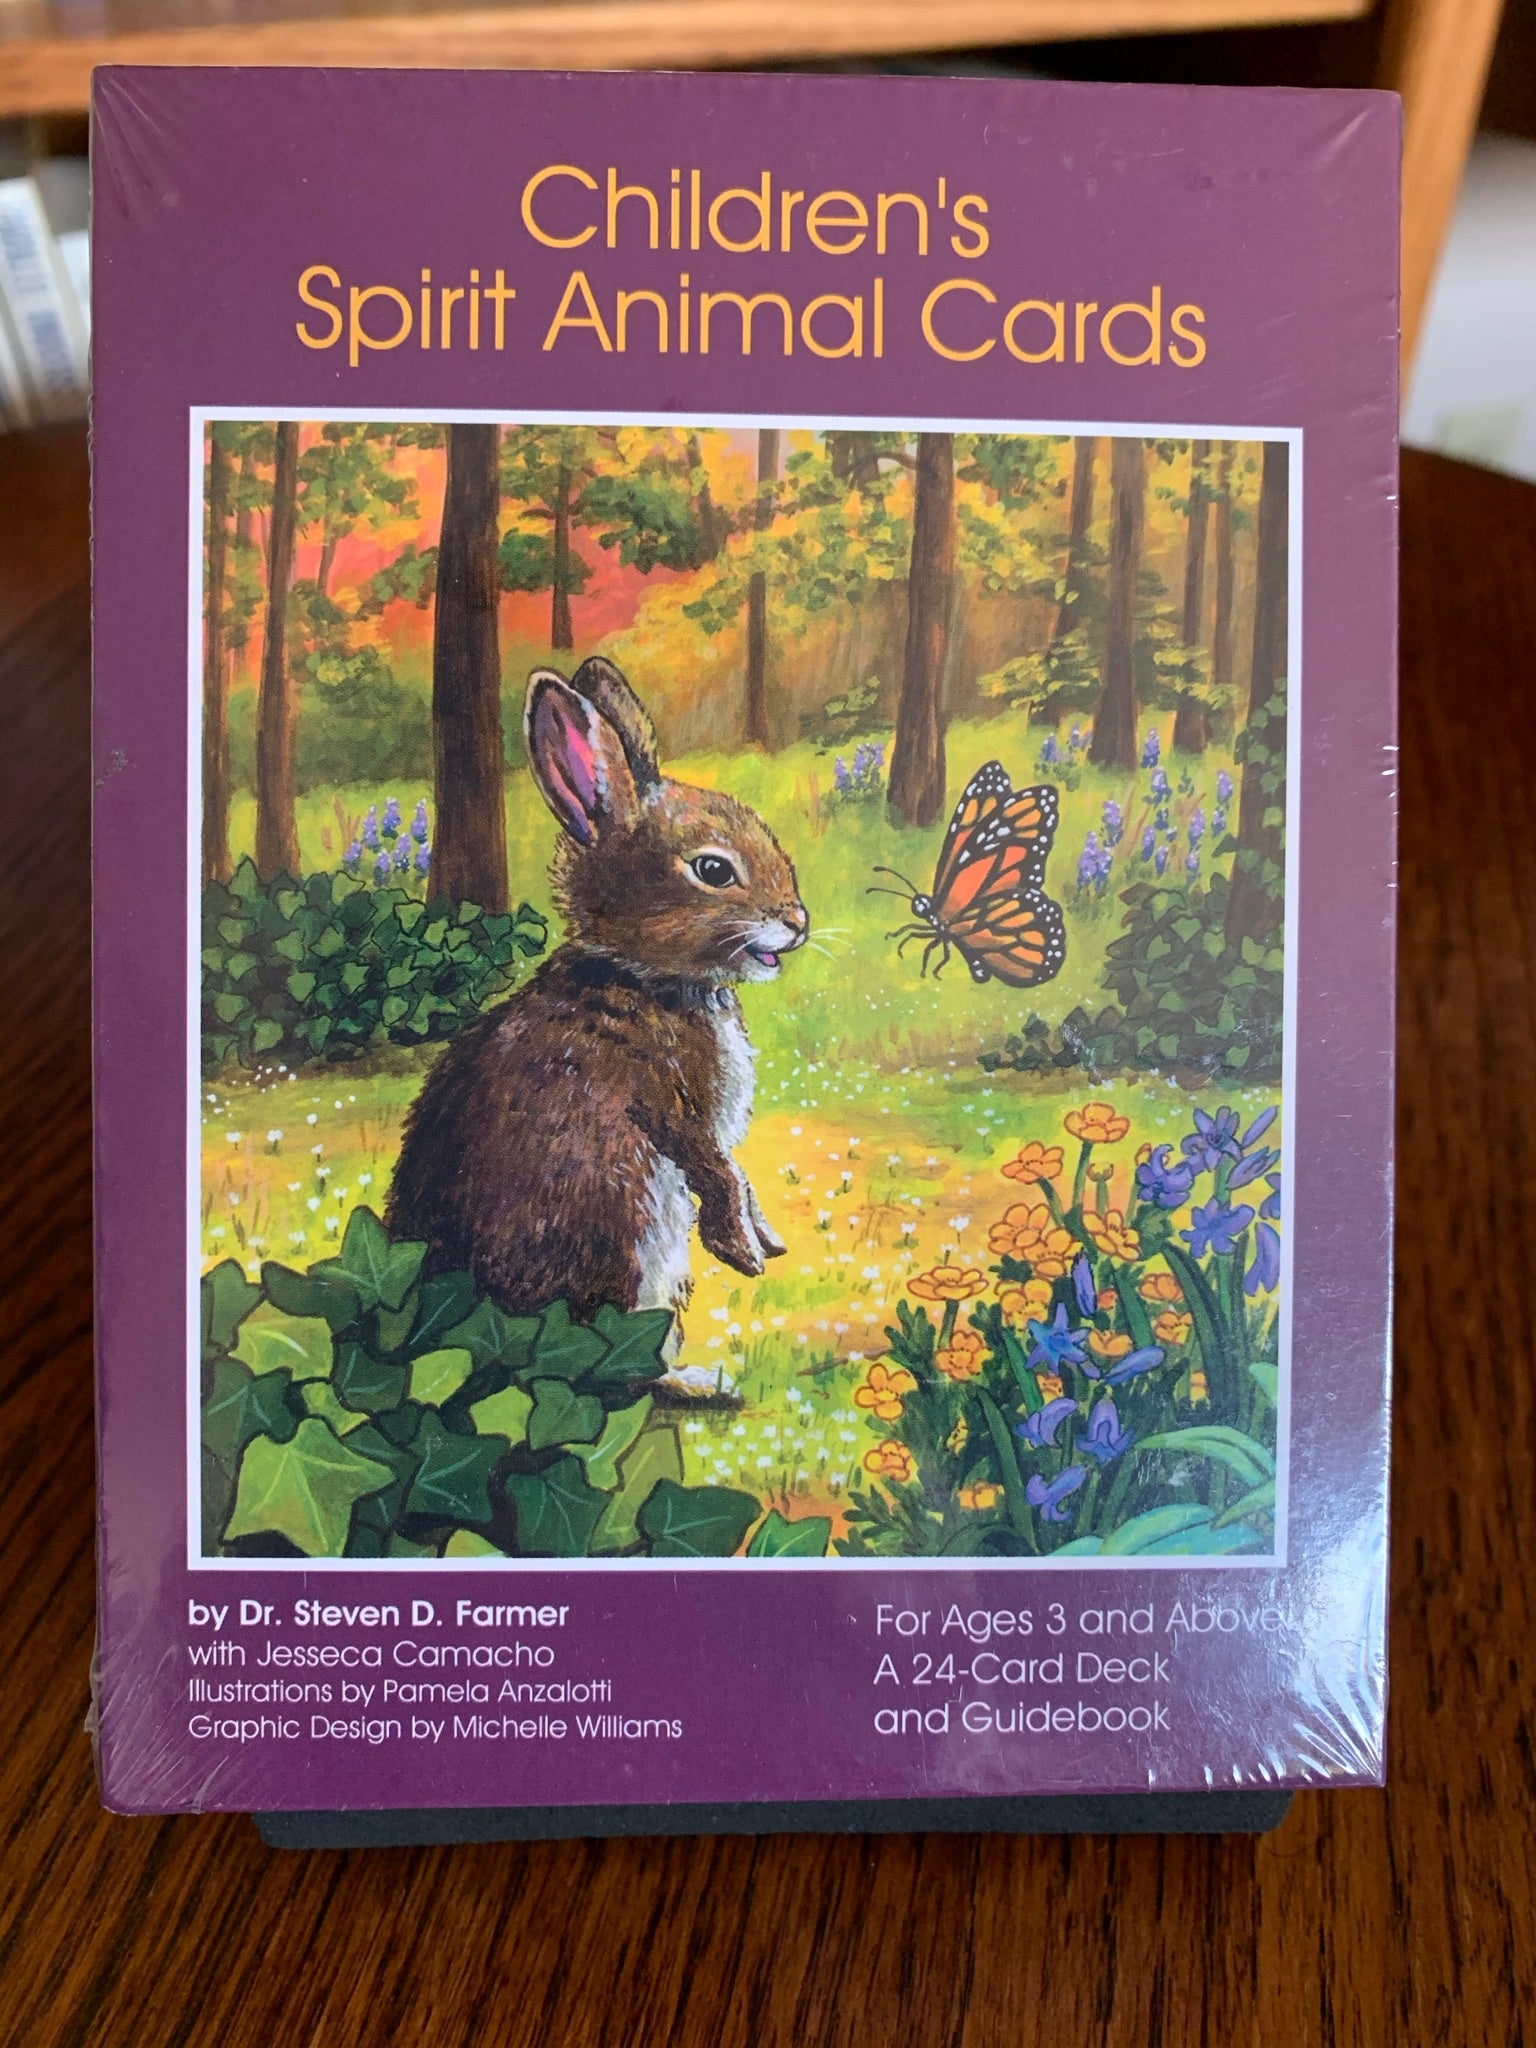 Photo of box front. Children's Spirit Animal Cards, with their colorful and inspiring illustrations give children the chance to choose cards and gain insights without the complexities of adult oracle cards. It also opens children up to the idea of spirit animals and the powerful messages they bring with simple words or phrases and artwork that they will love. Set consists of 24 oracle cards, guidebook (with guidance for parents) and a box for storage. Cost is $15.99